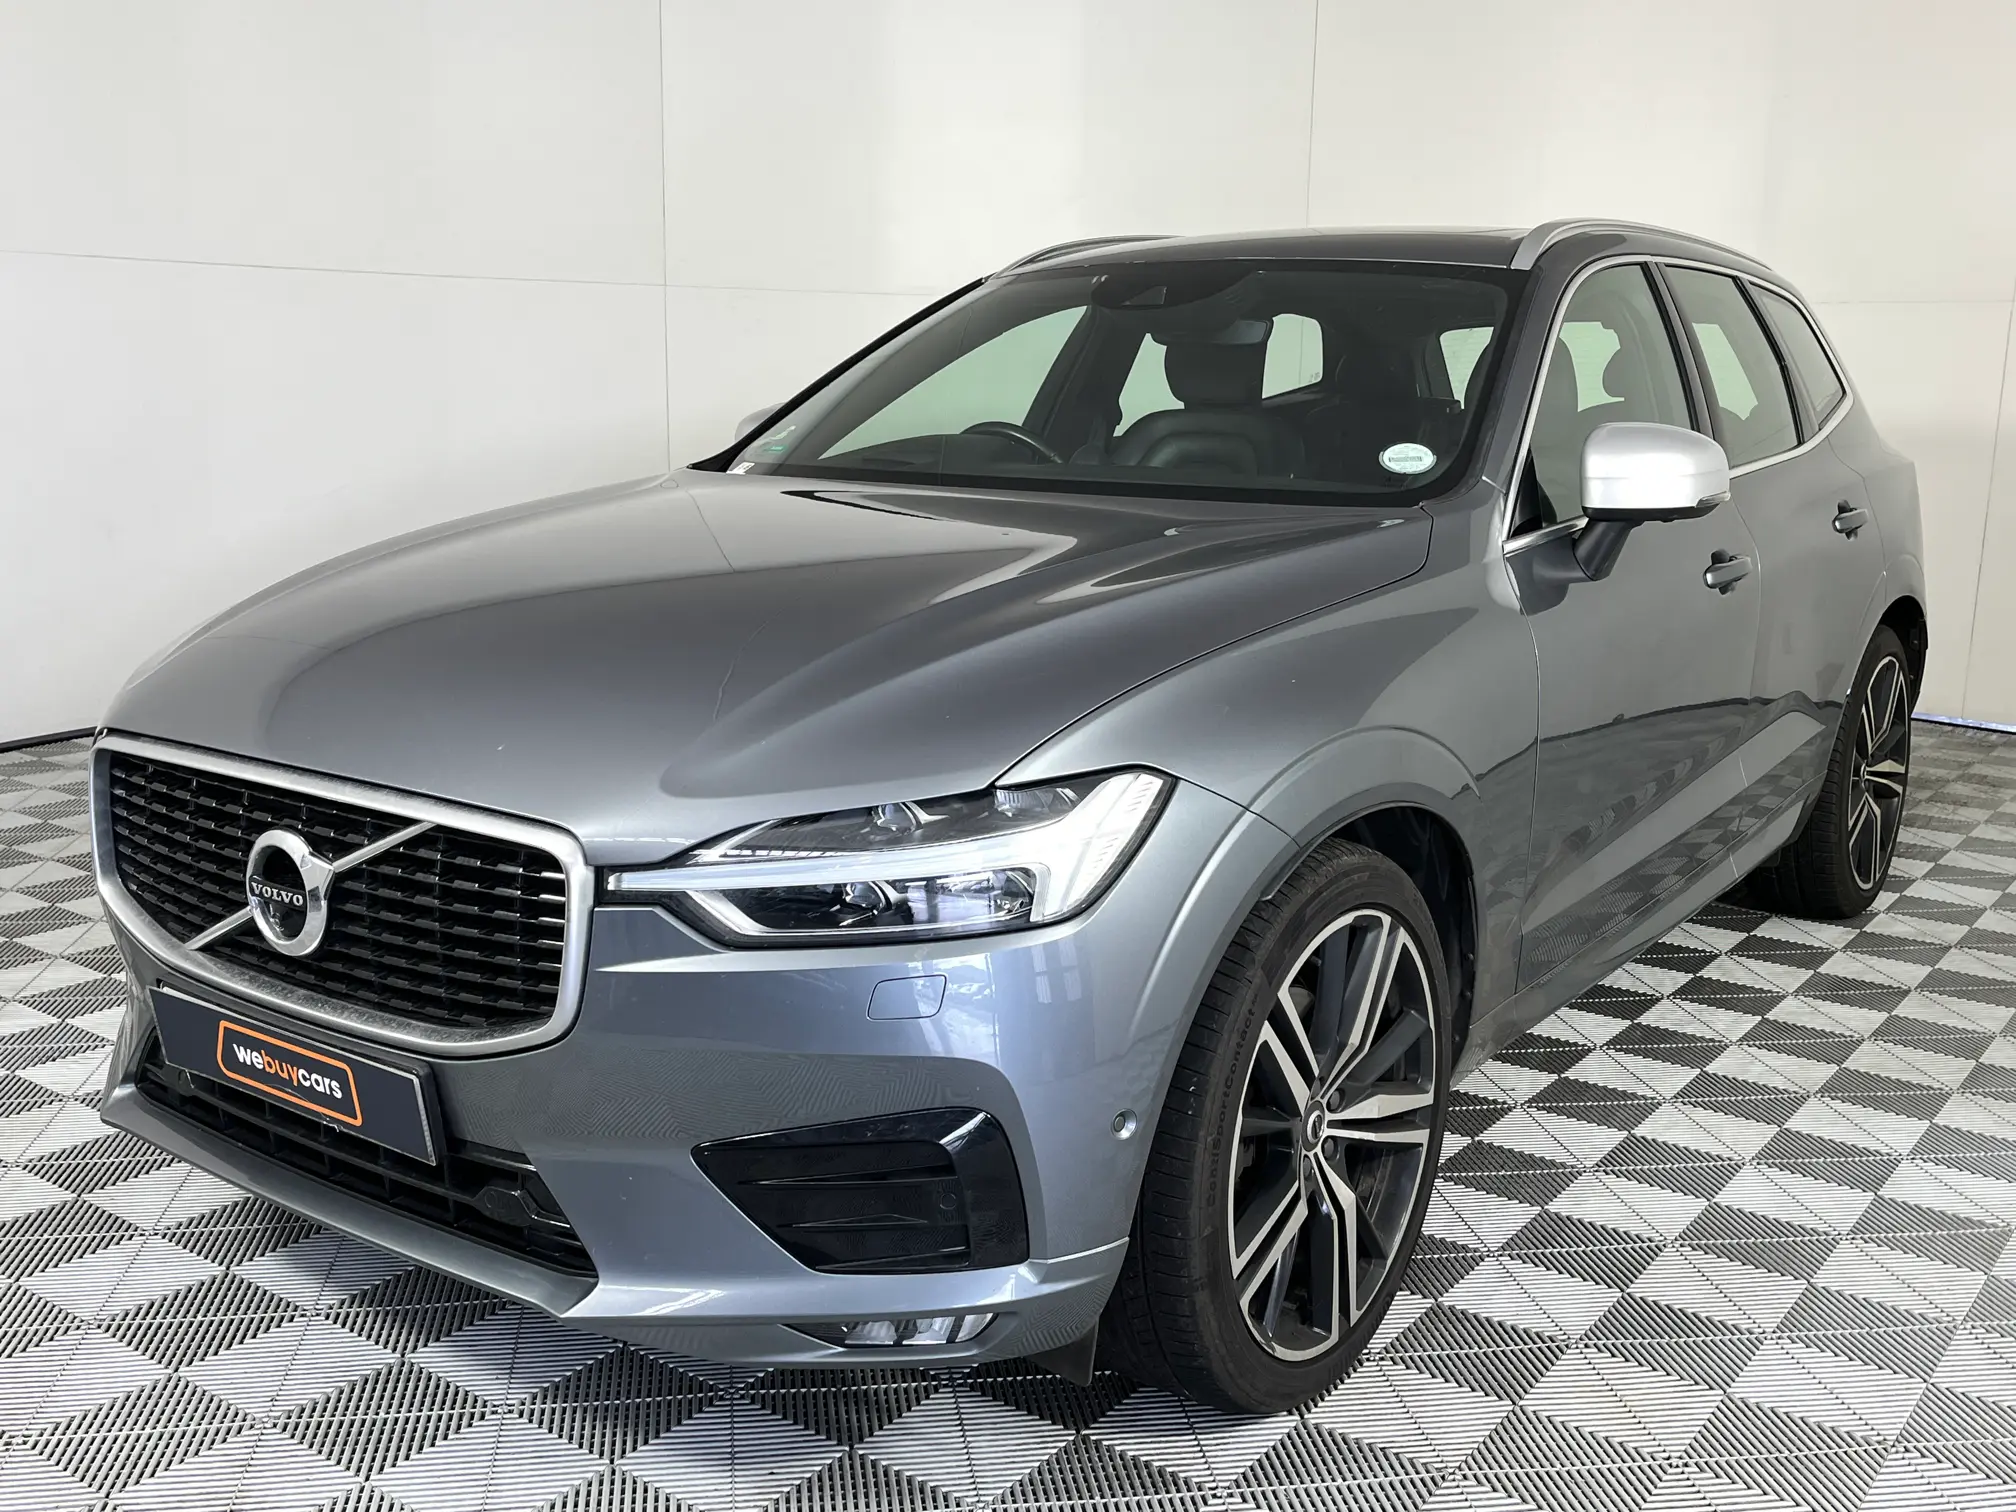 2019 Volvo Xc60 D4 R-Design Geartronic AWD